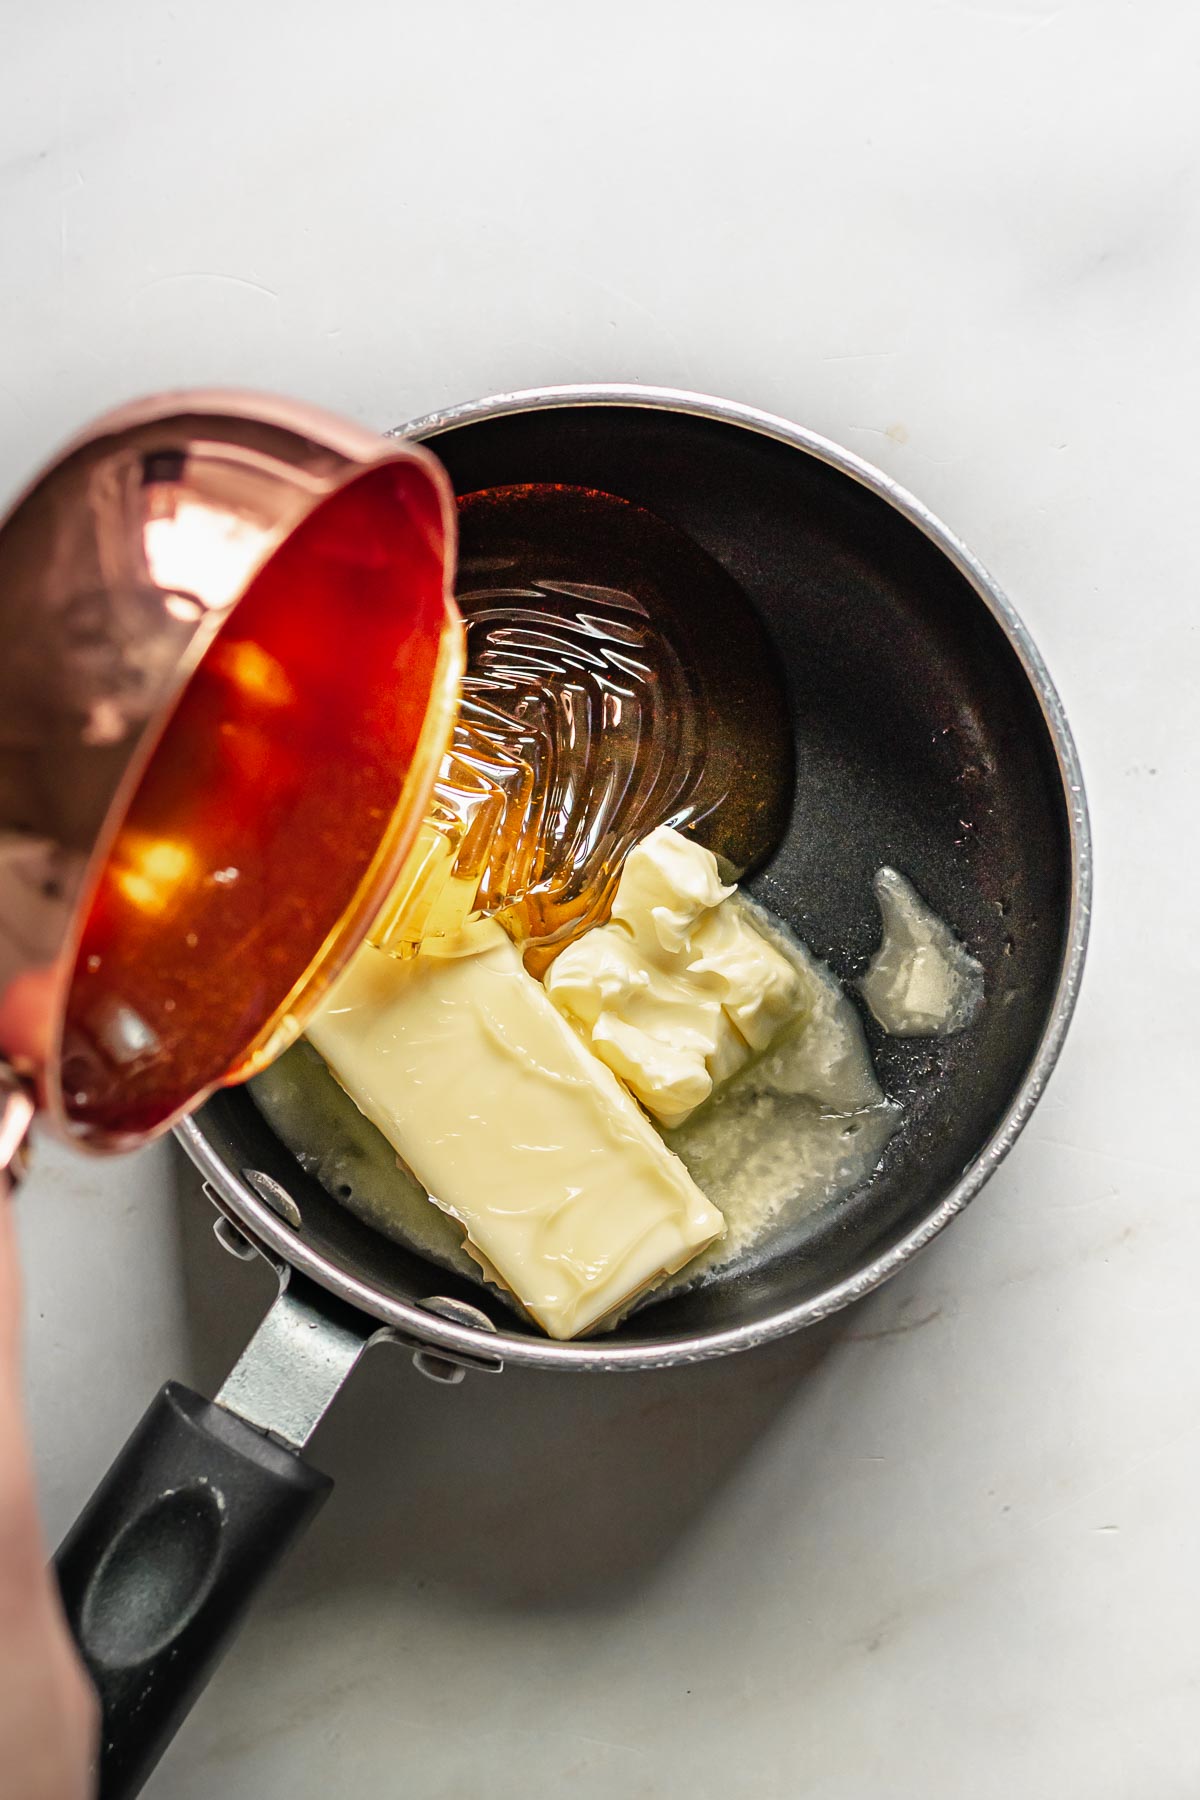 Honey being poured into a saucepan.